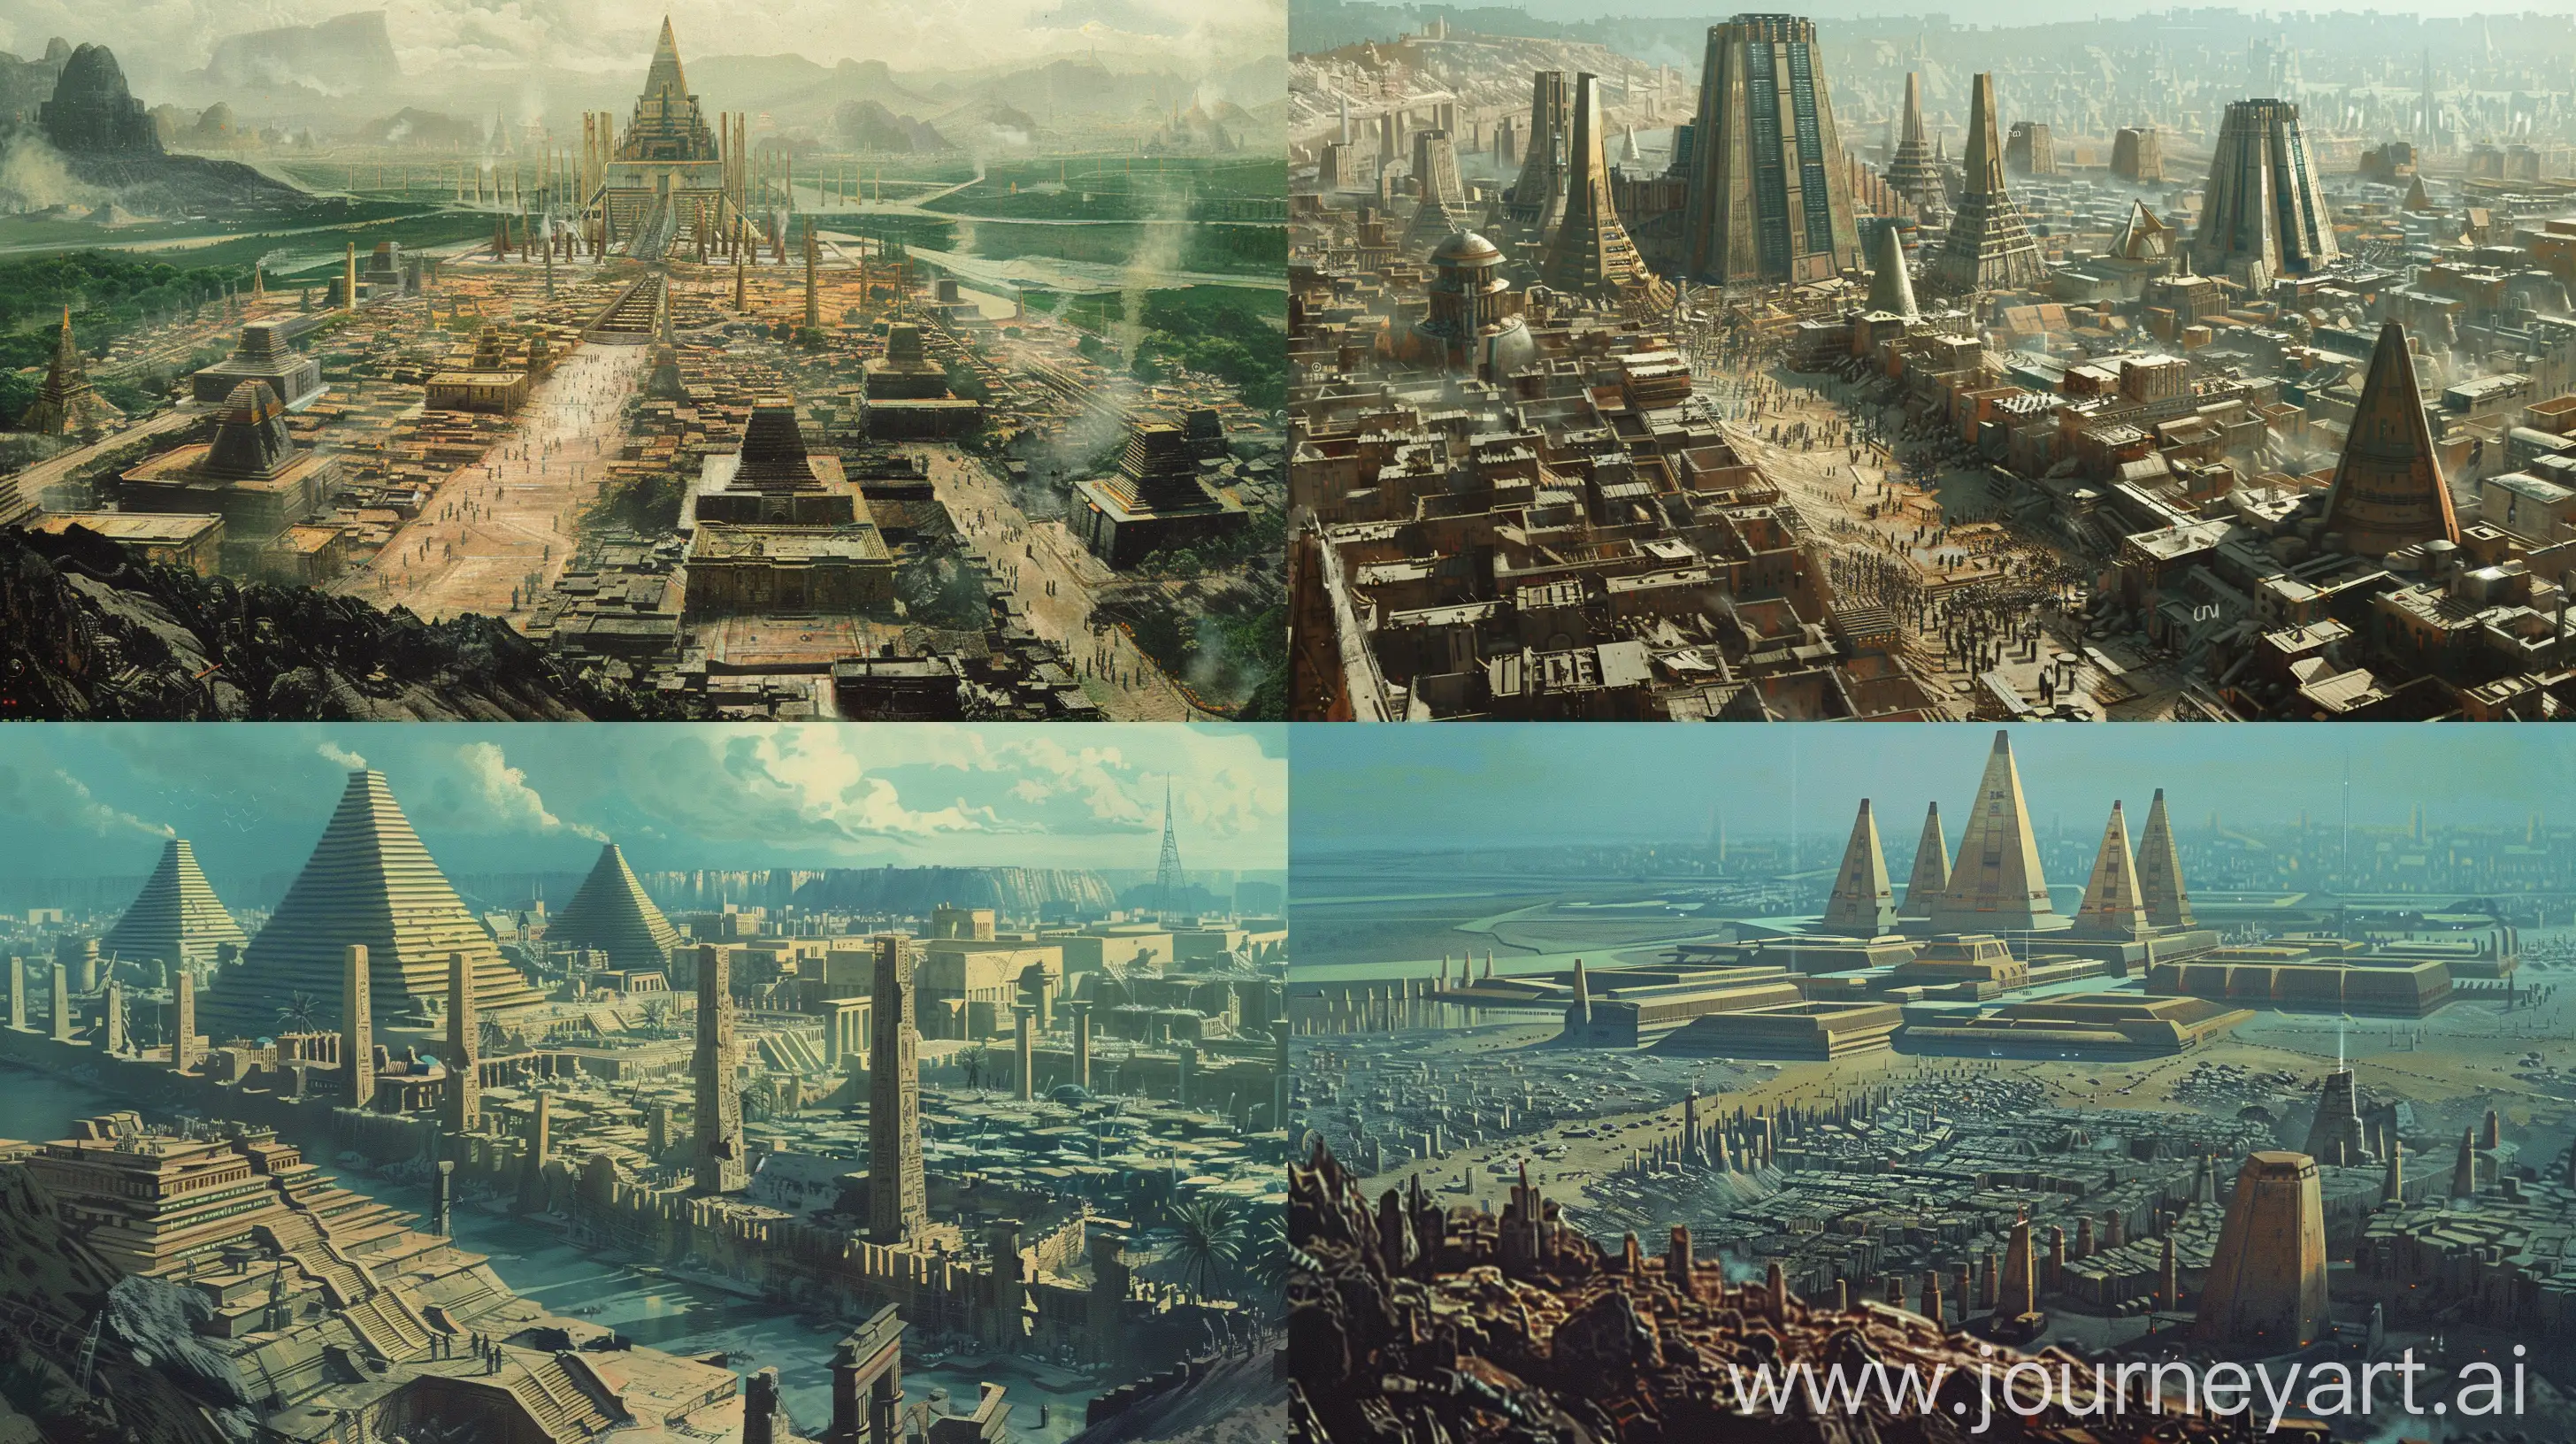 retro sci-fi concept art of far away view of a city of majestic futuristic pylon and ziggurat architecture surrounded by squalid slums. Ralph McQuarrie style. in color. --ar 16:9

